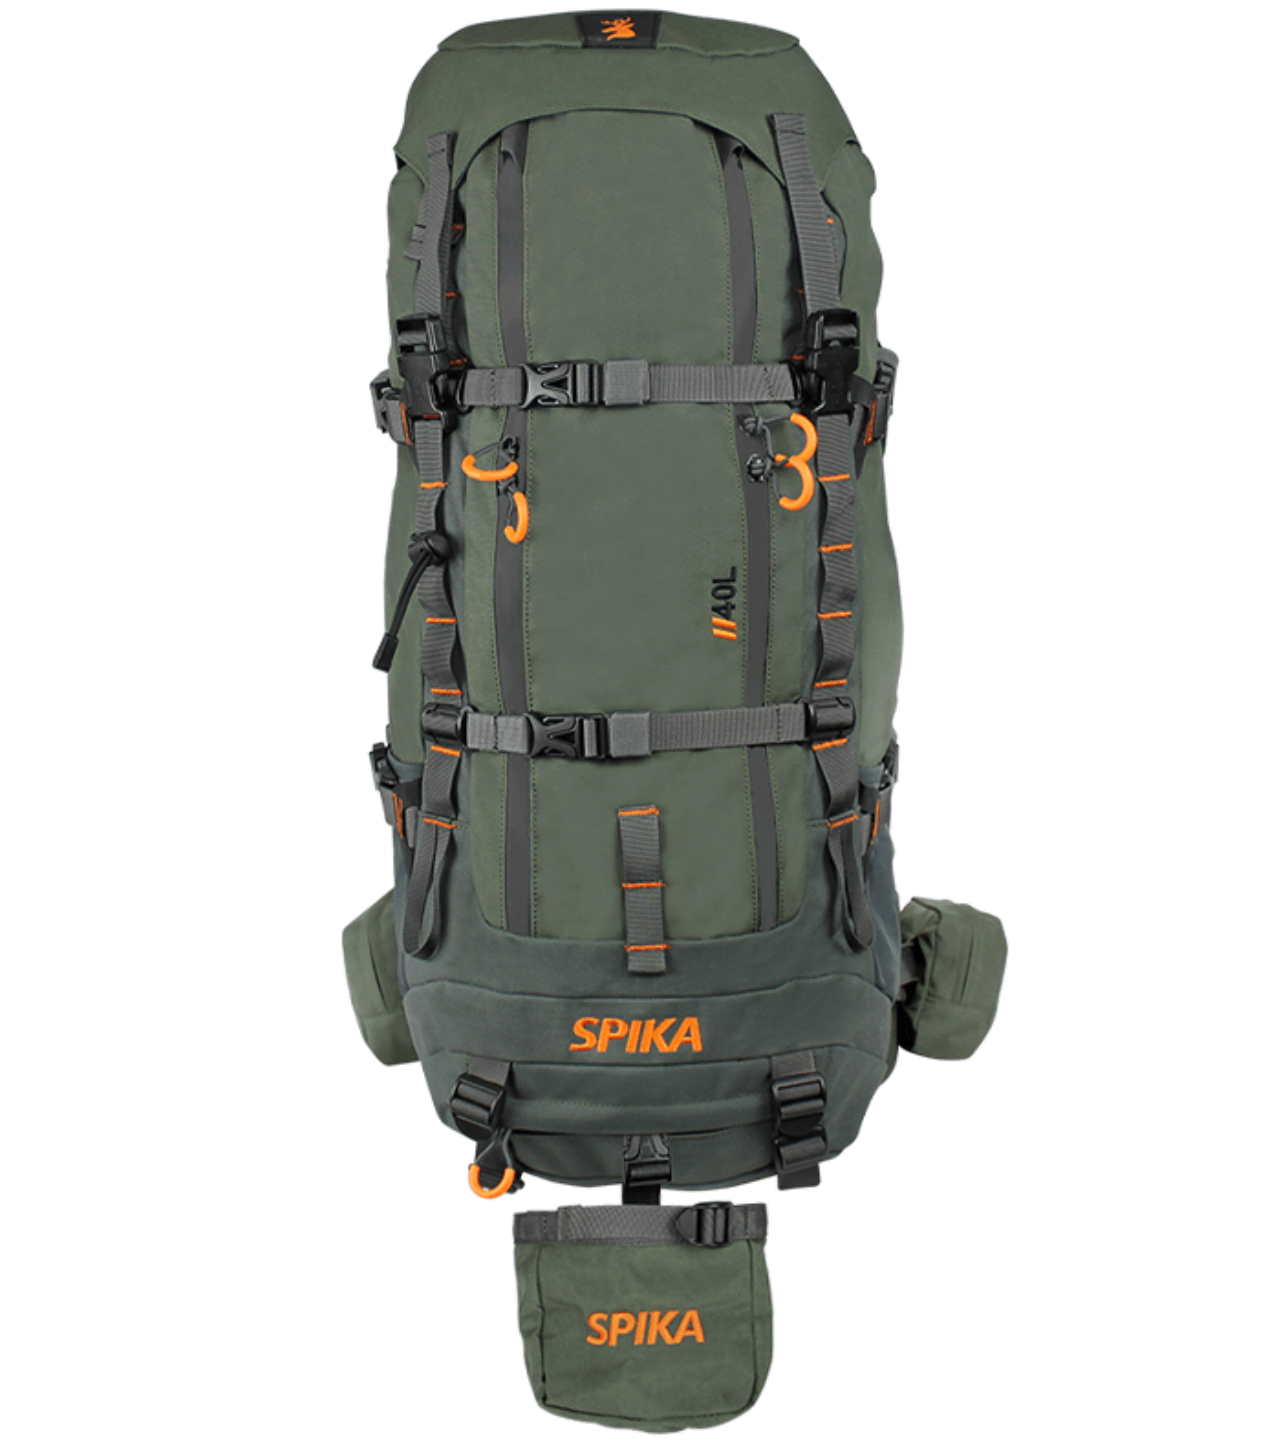 Spika Drover Hauler Pack + Hauler From Olive 40l -  - Mansfield Hunting & Fishing - Products to prepare for Corona Virus